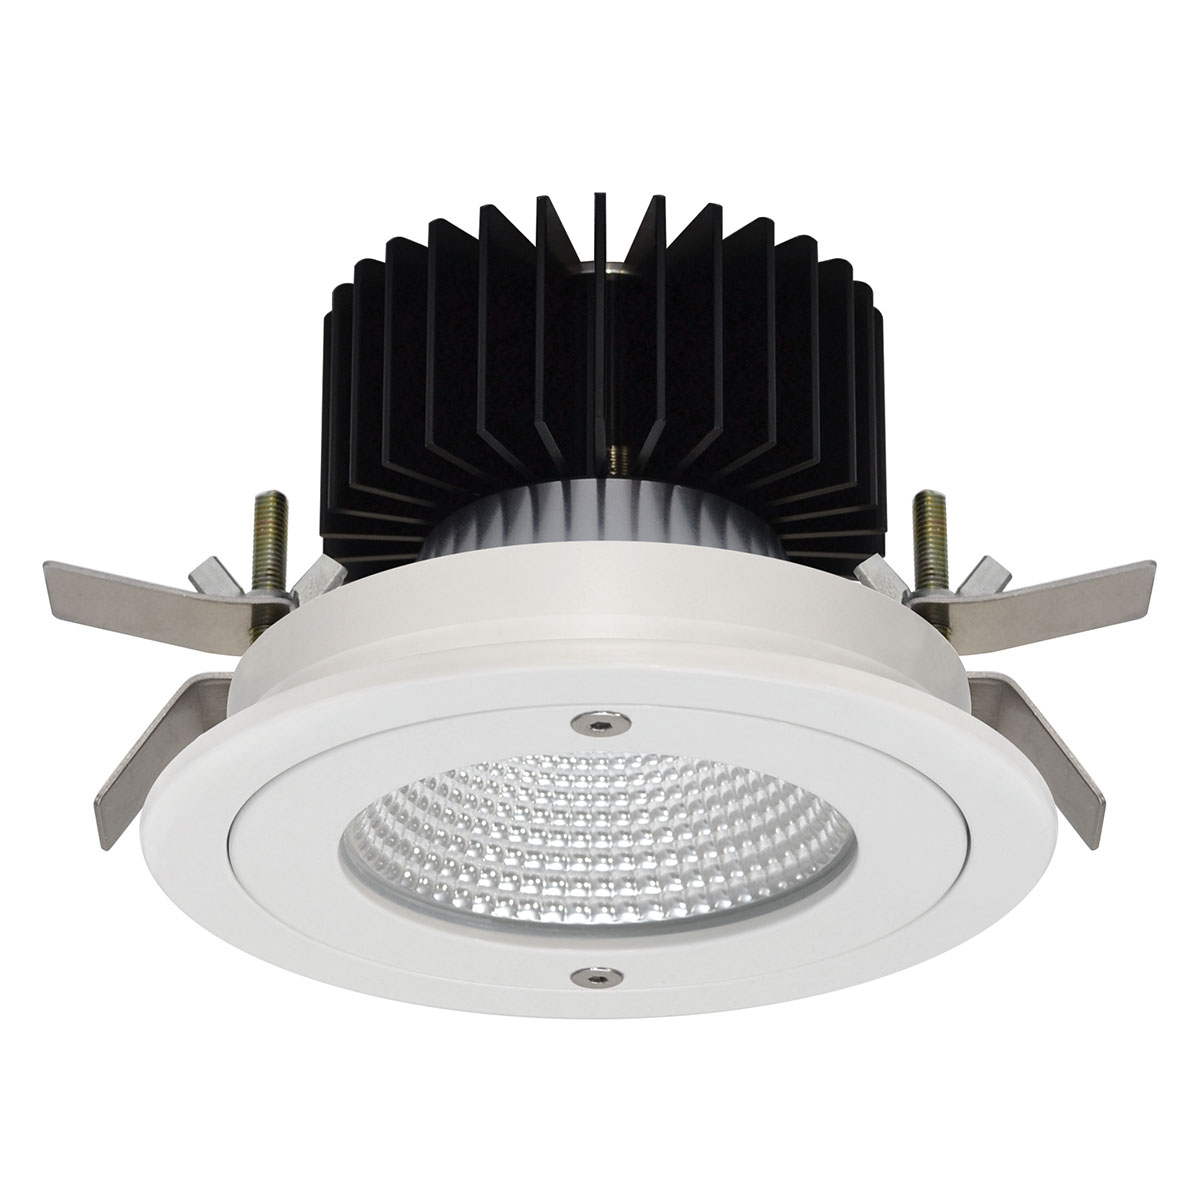 Kopa 10W Anti Tamper Fixed Round Recessed Downlight IP65 Rated 25° Degree Reflector Black